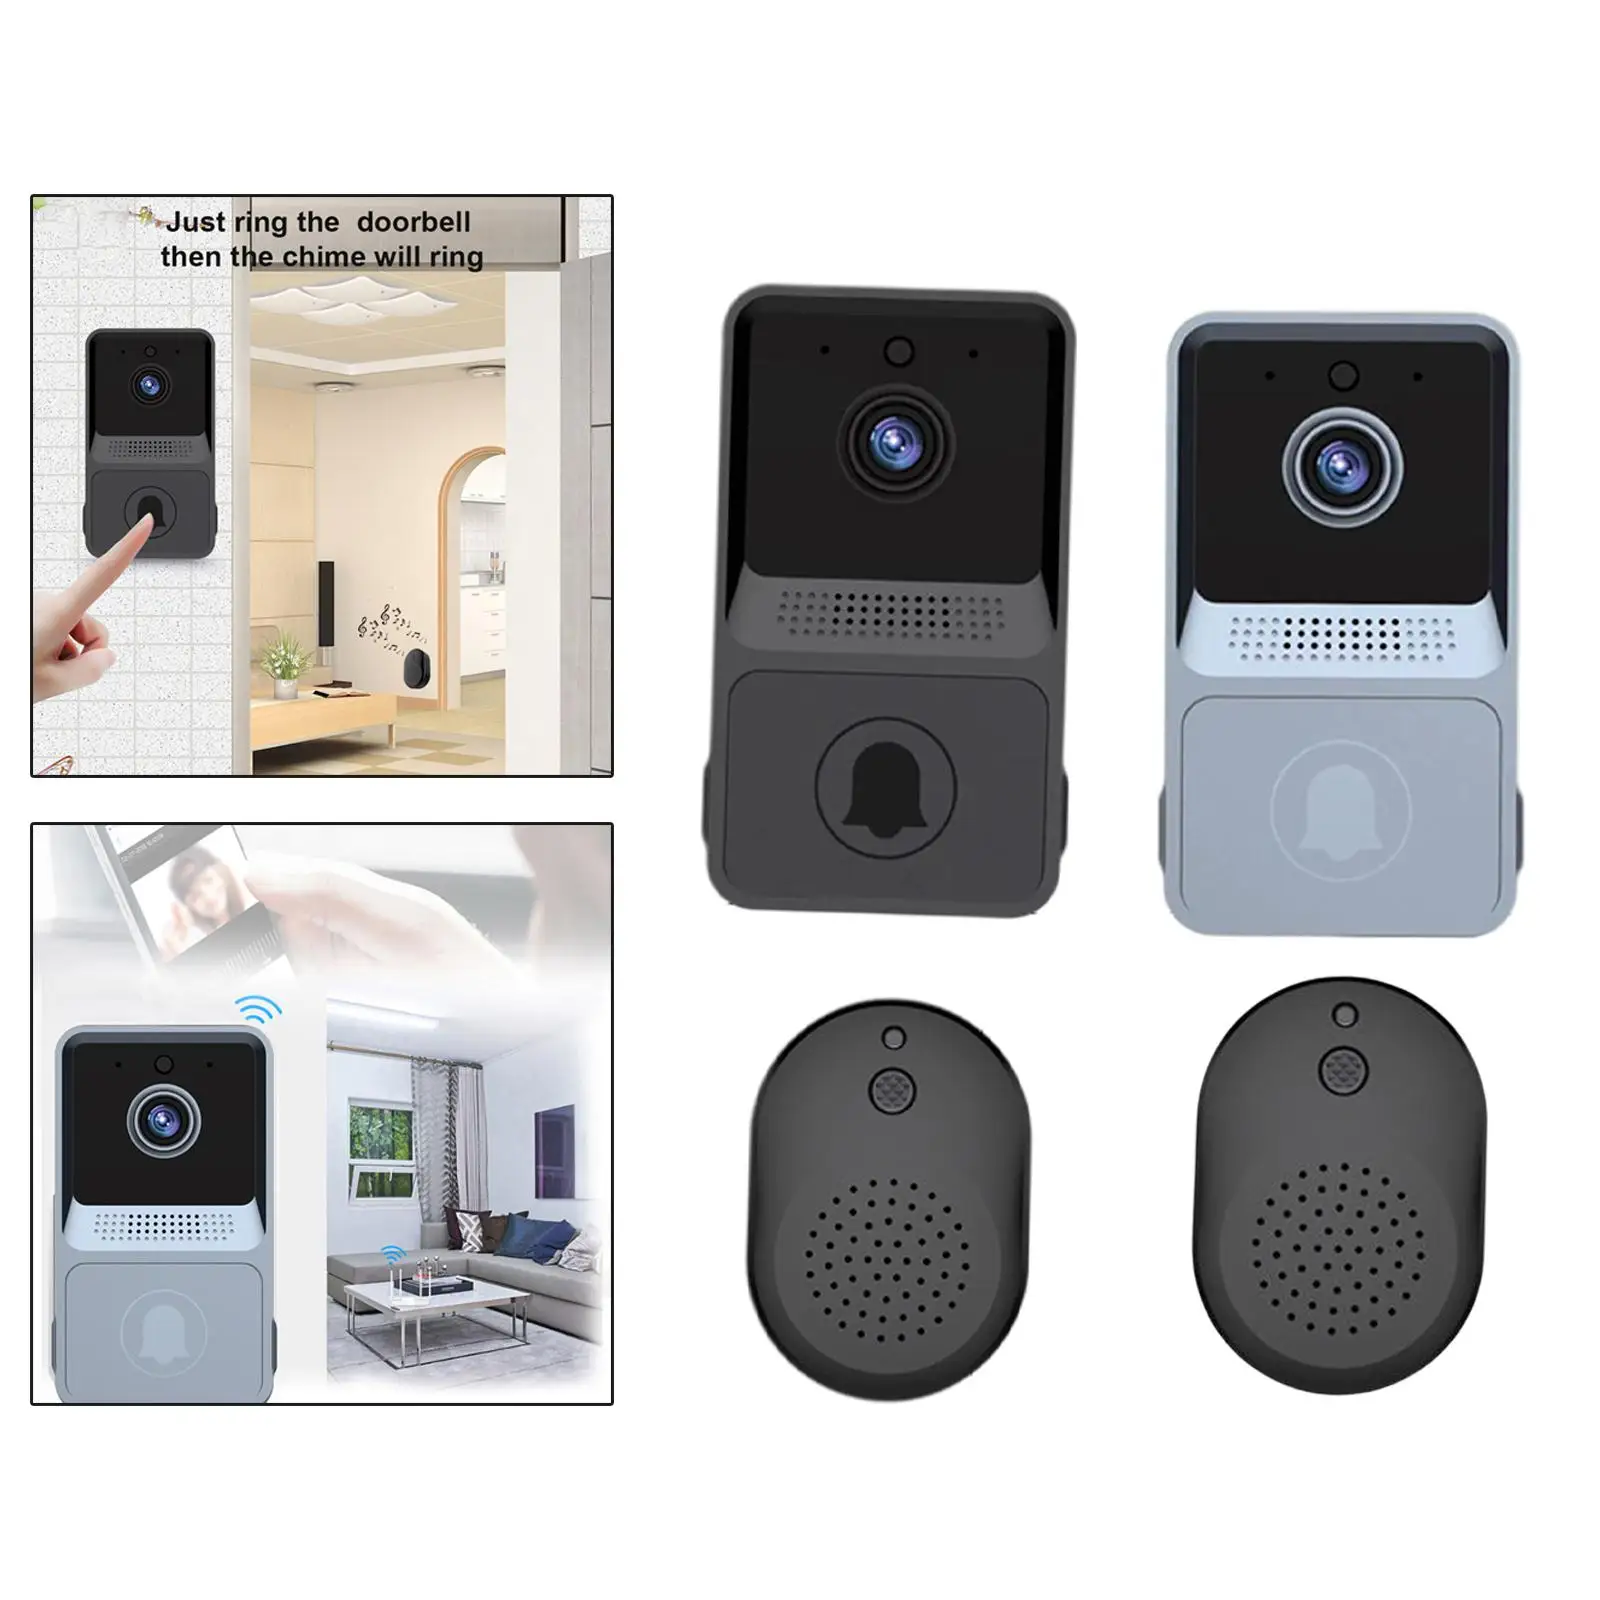 WiFi WiFi Video Doorbell Can Two Way Calls,Photo,App Control for Outdoor